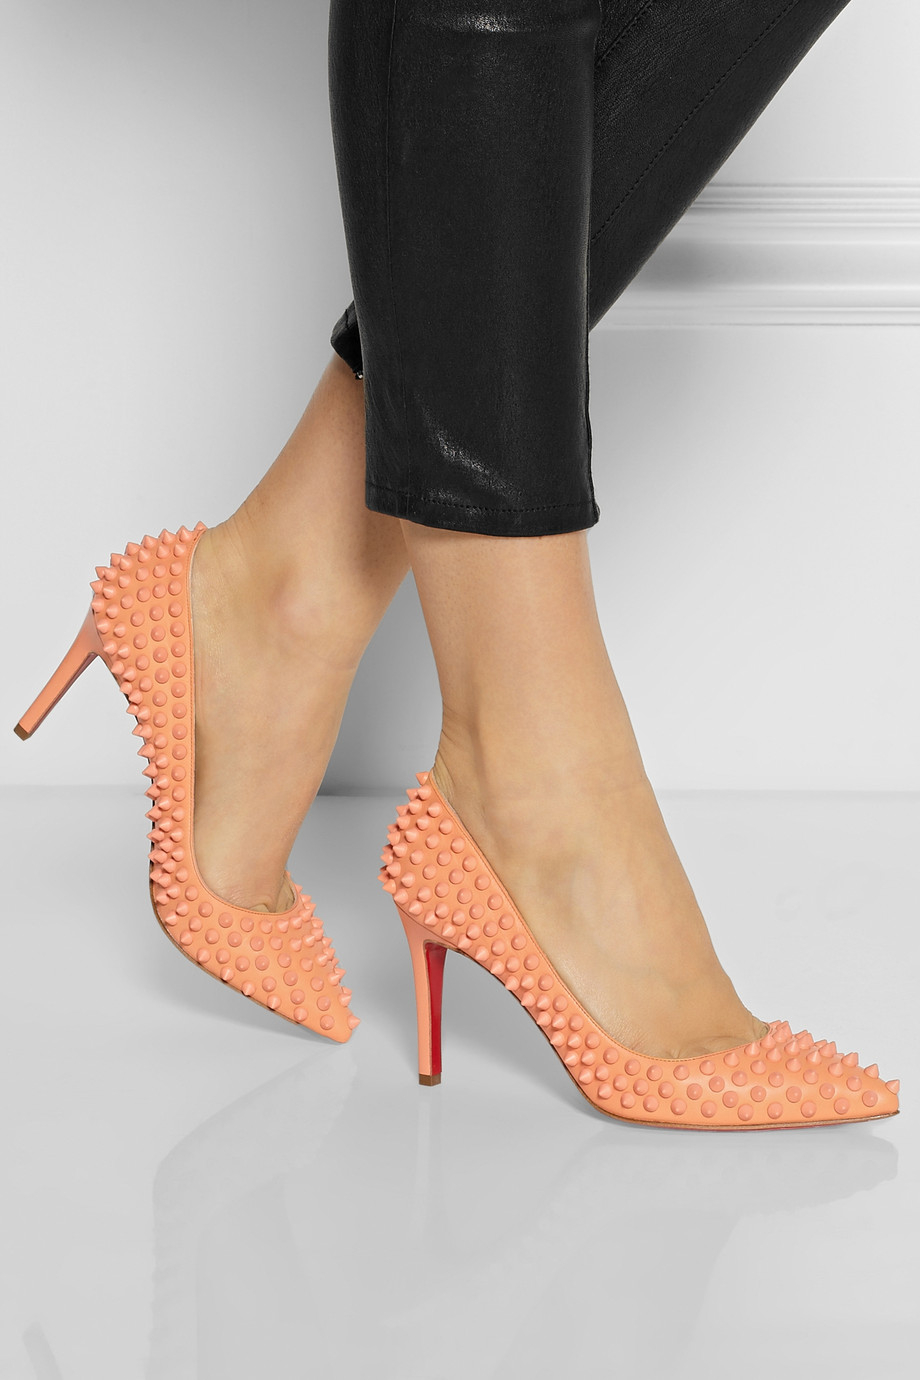 christian louboutin black patent pigalle 85